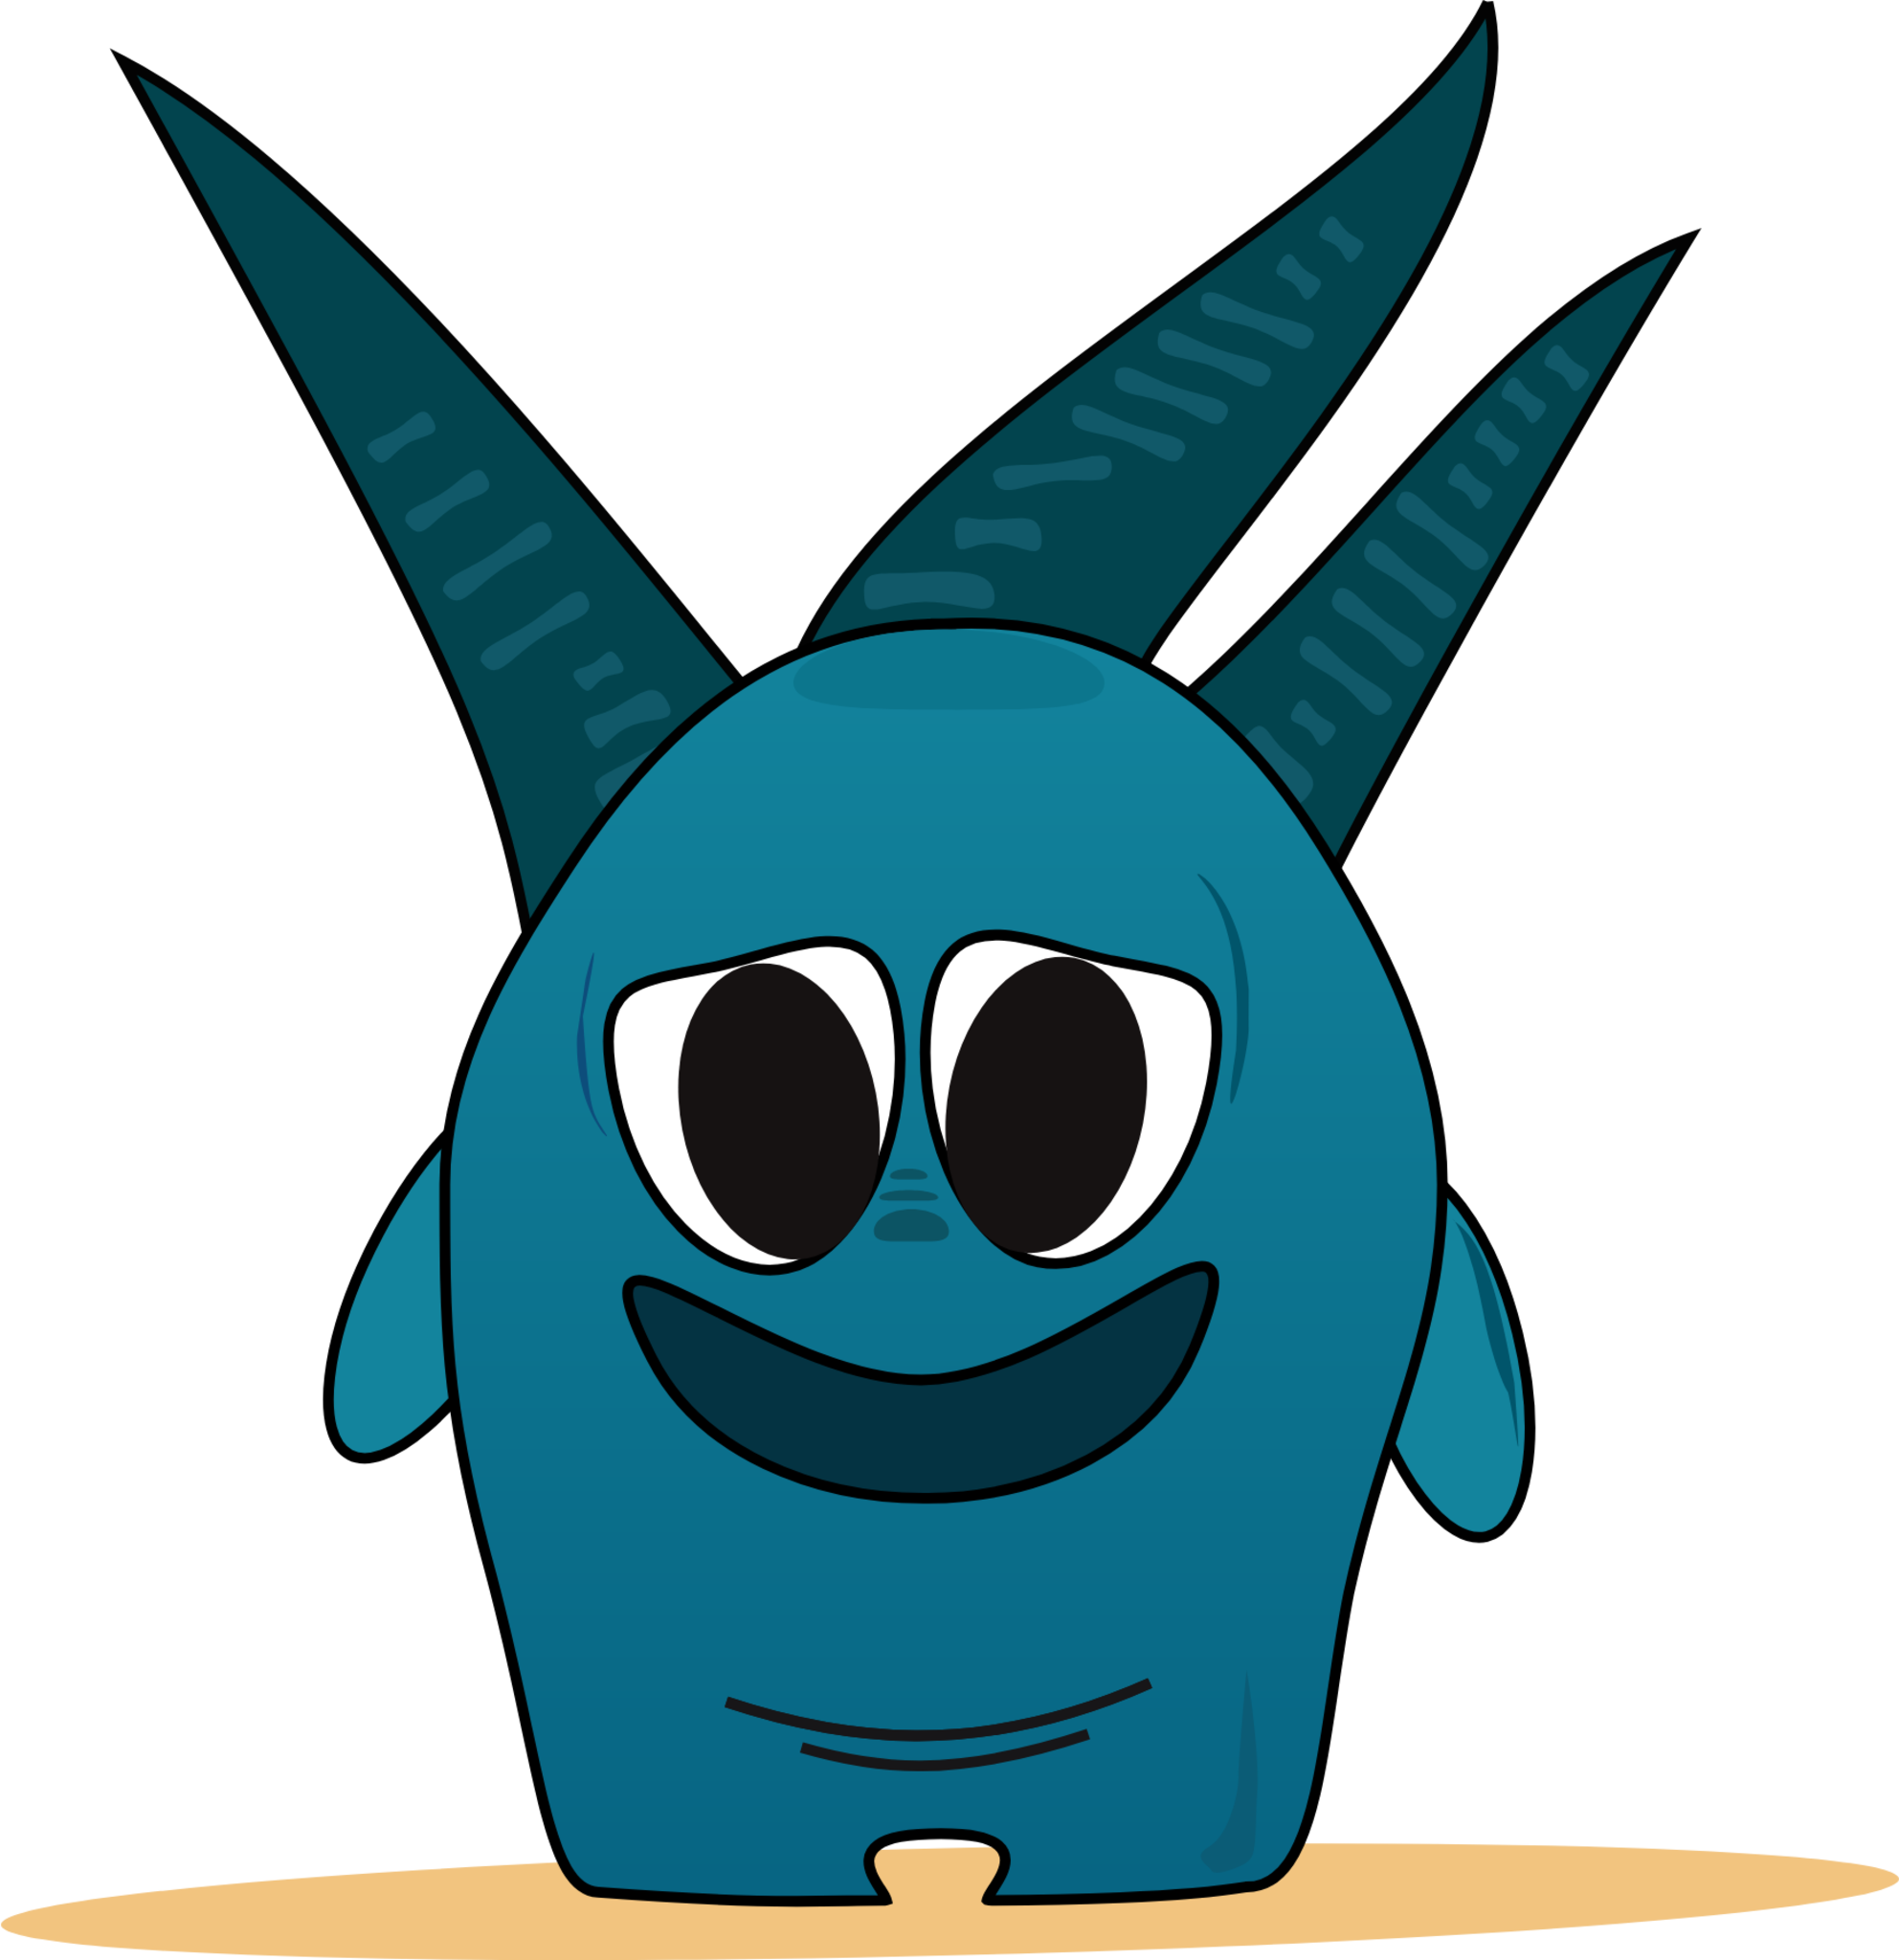 bluish lazy monster with three horns and sad eyes and no teeths icon